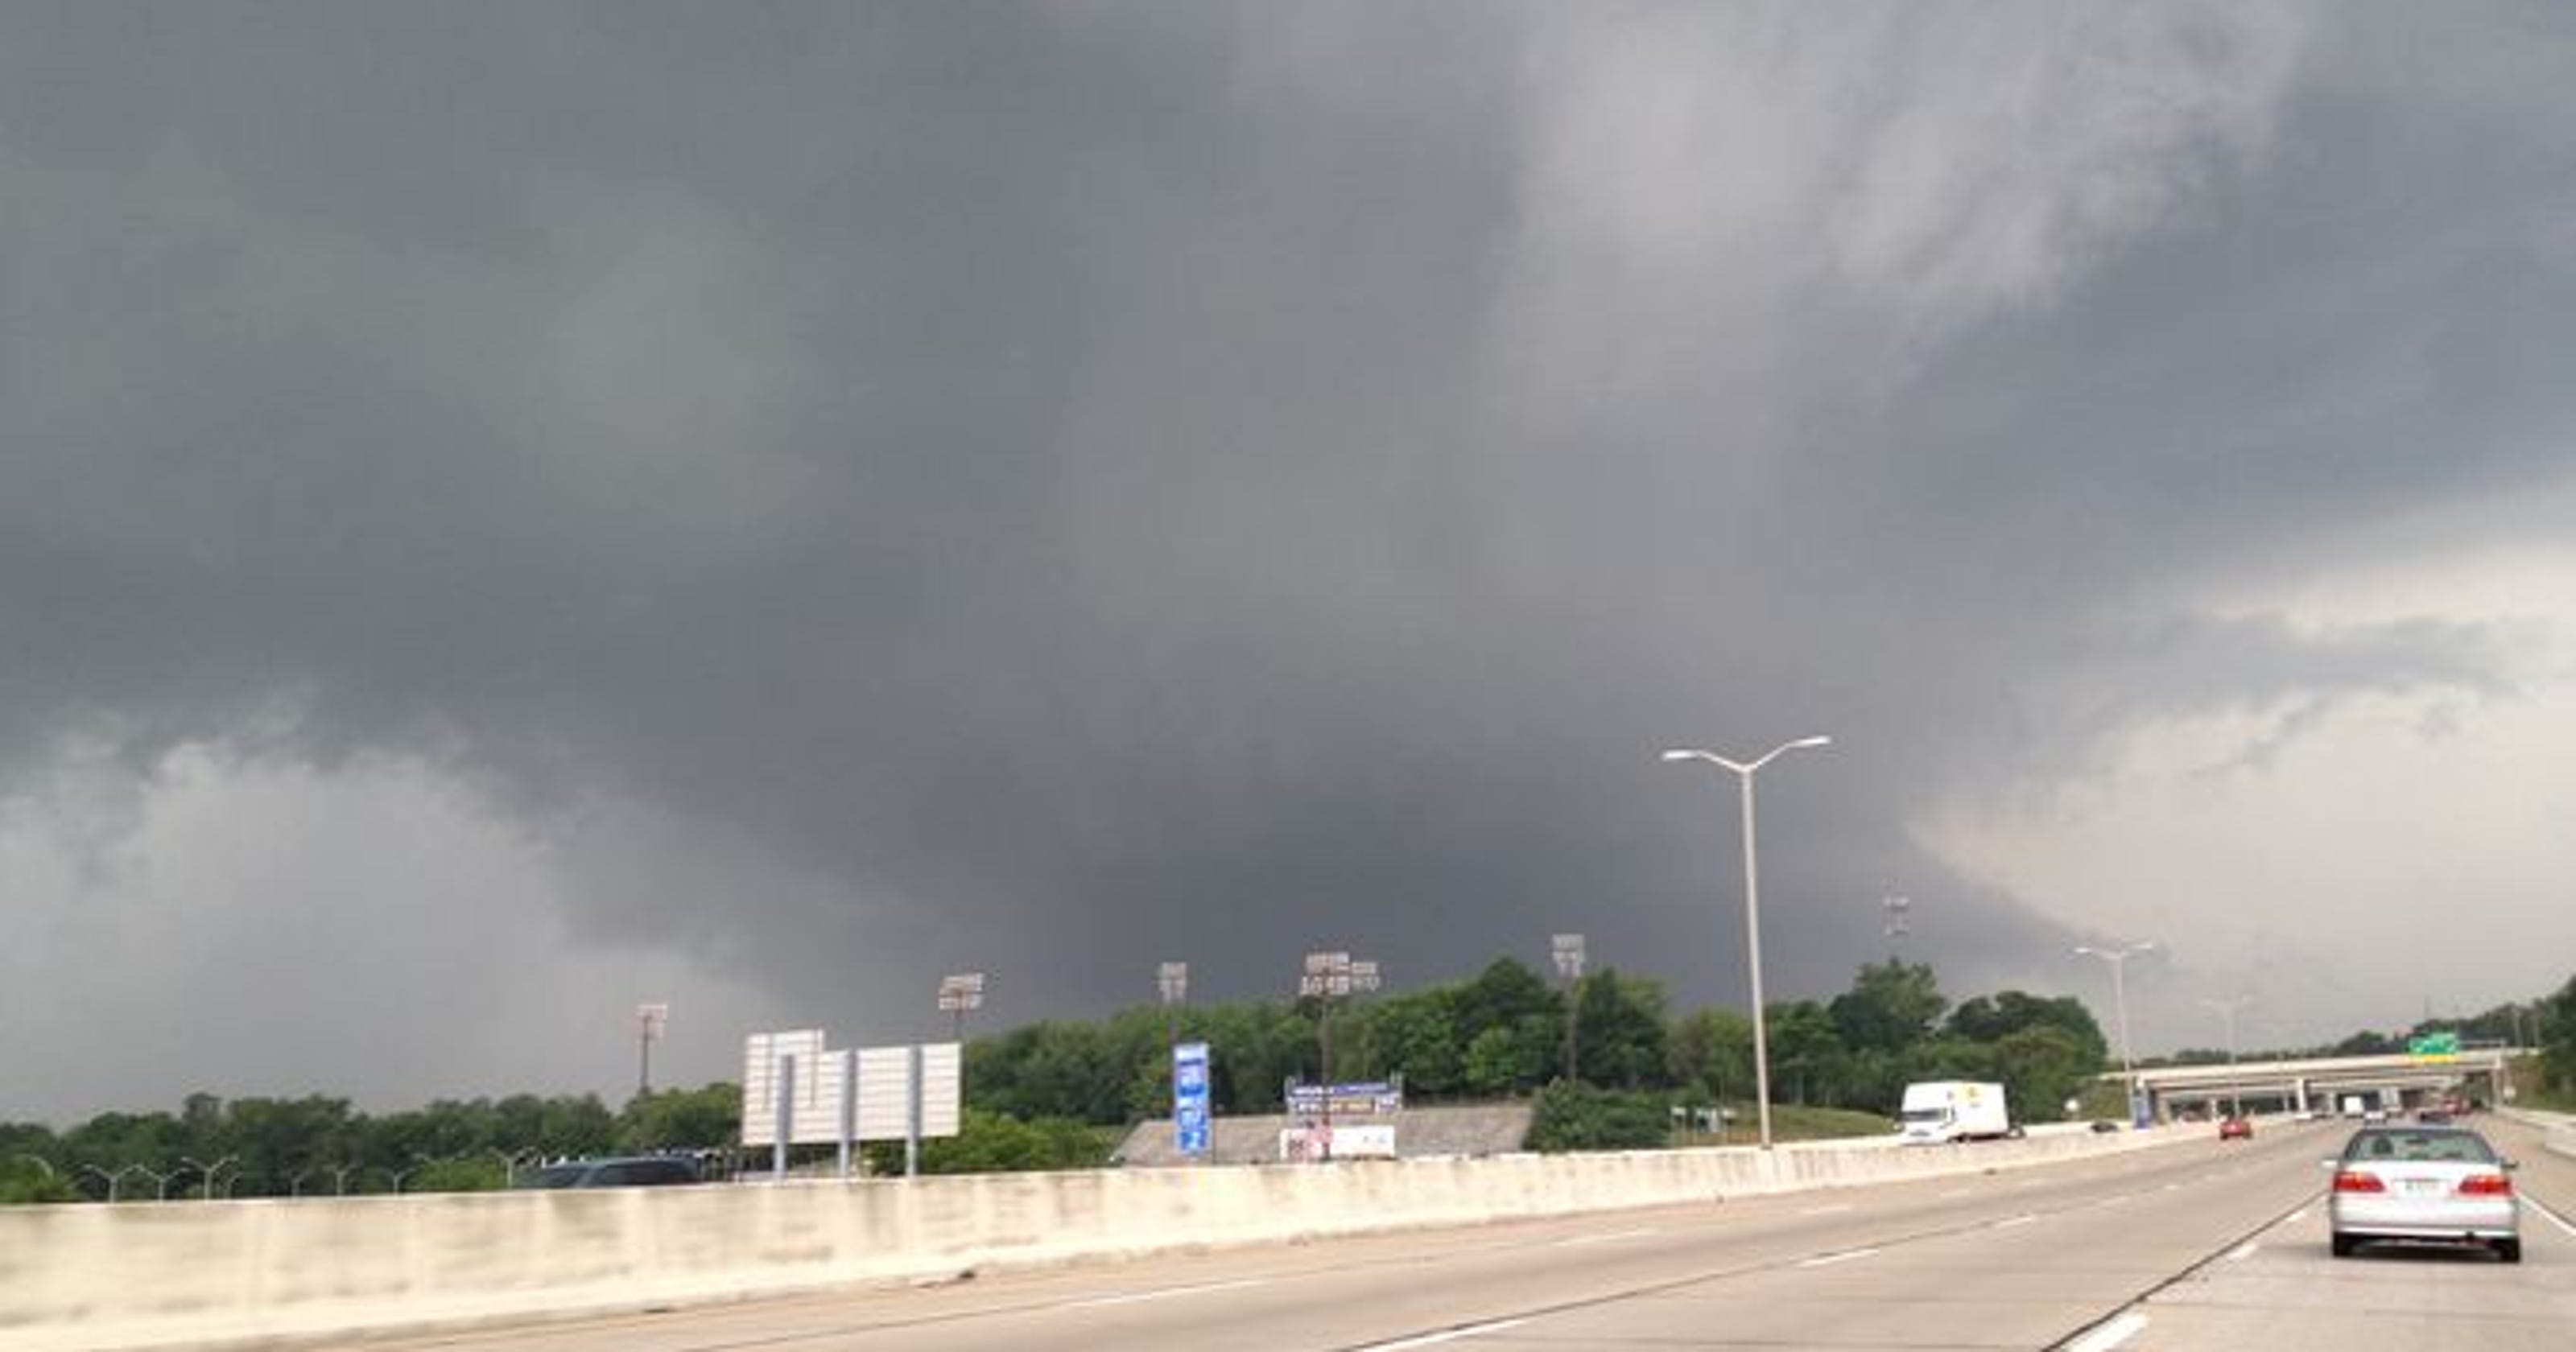 3 tornadoes confirmed in Indiana on Tuesday